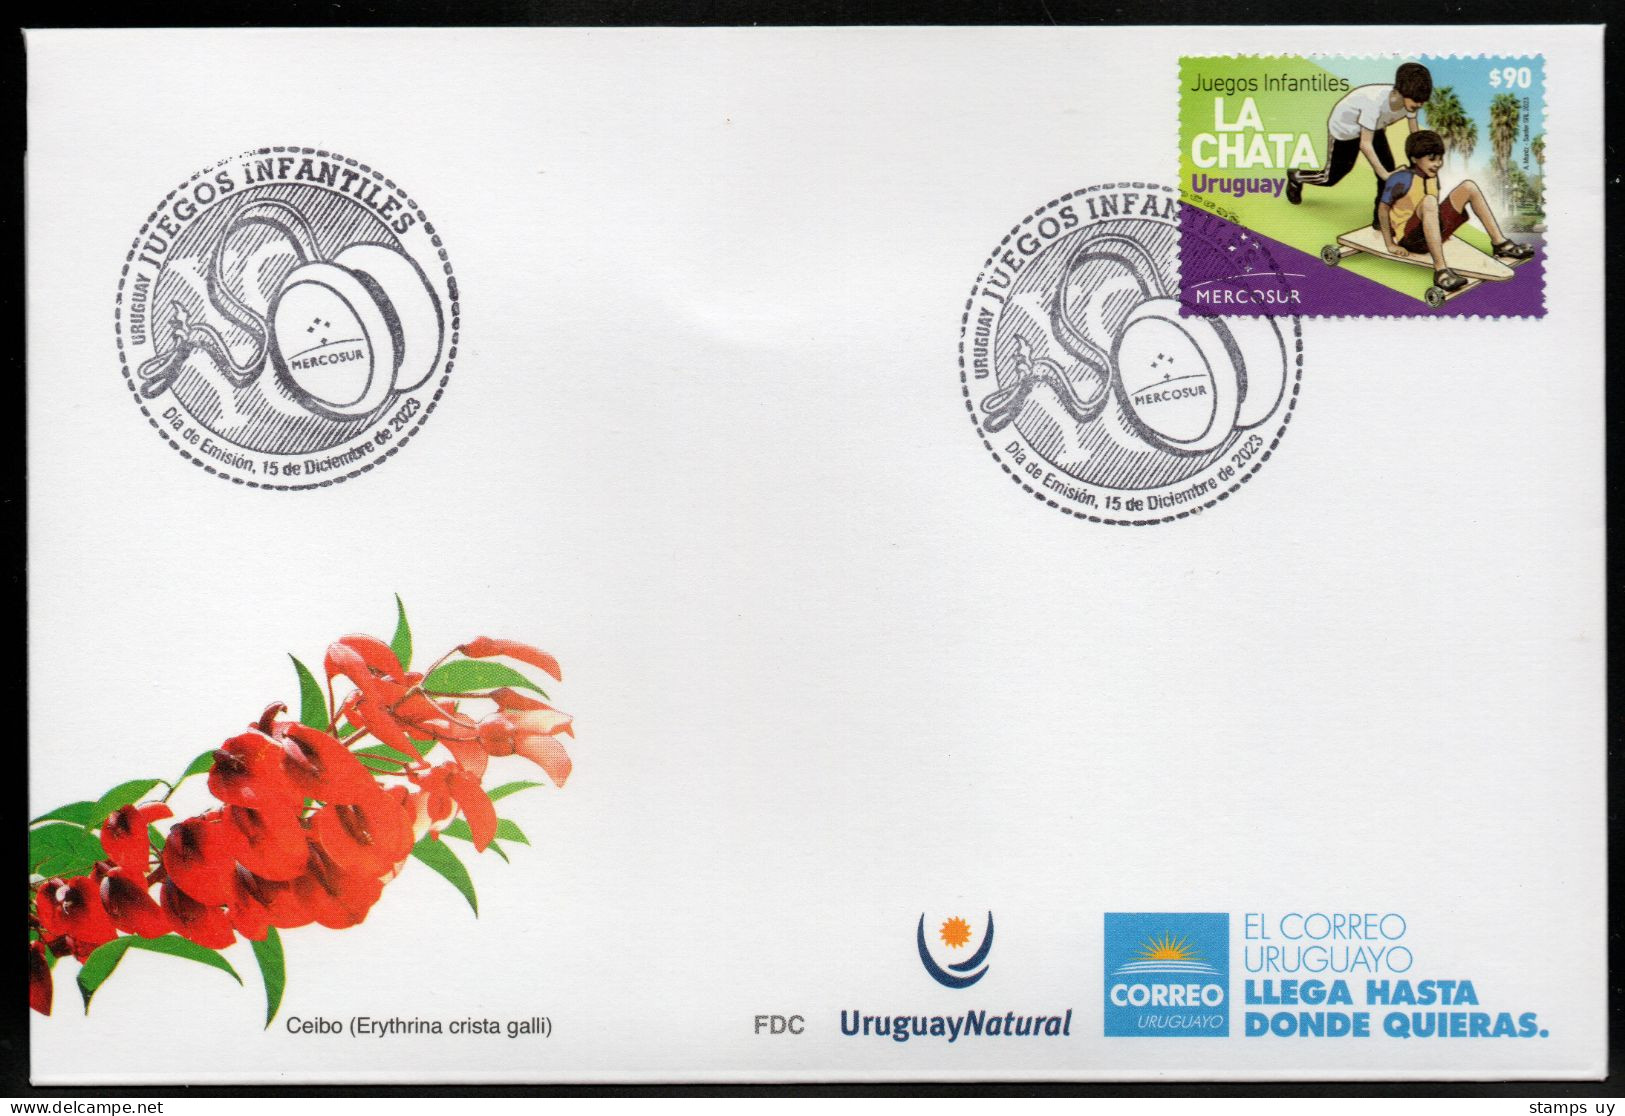 URUGUAY 2023 (Joint Issue, Mercosur, Games, Children, Toys, Wooden Cart, YoYo, Ruleman, Palm, Tree, Crux, Stars) - 1 FDC - Arbres